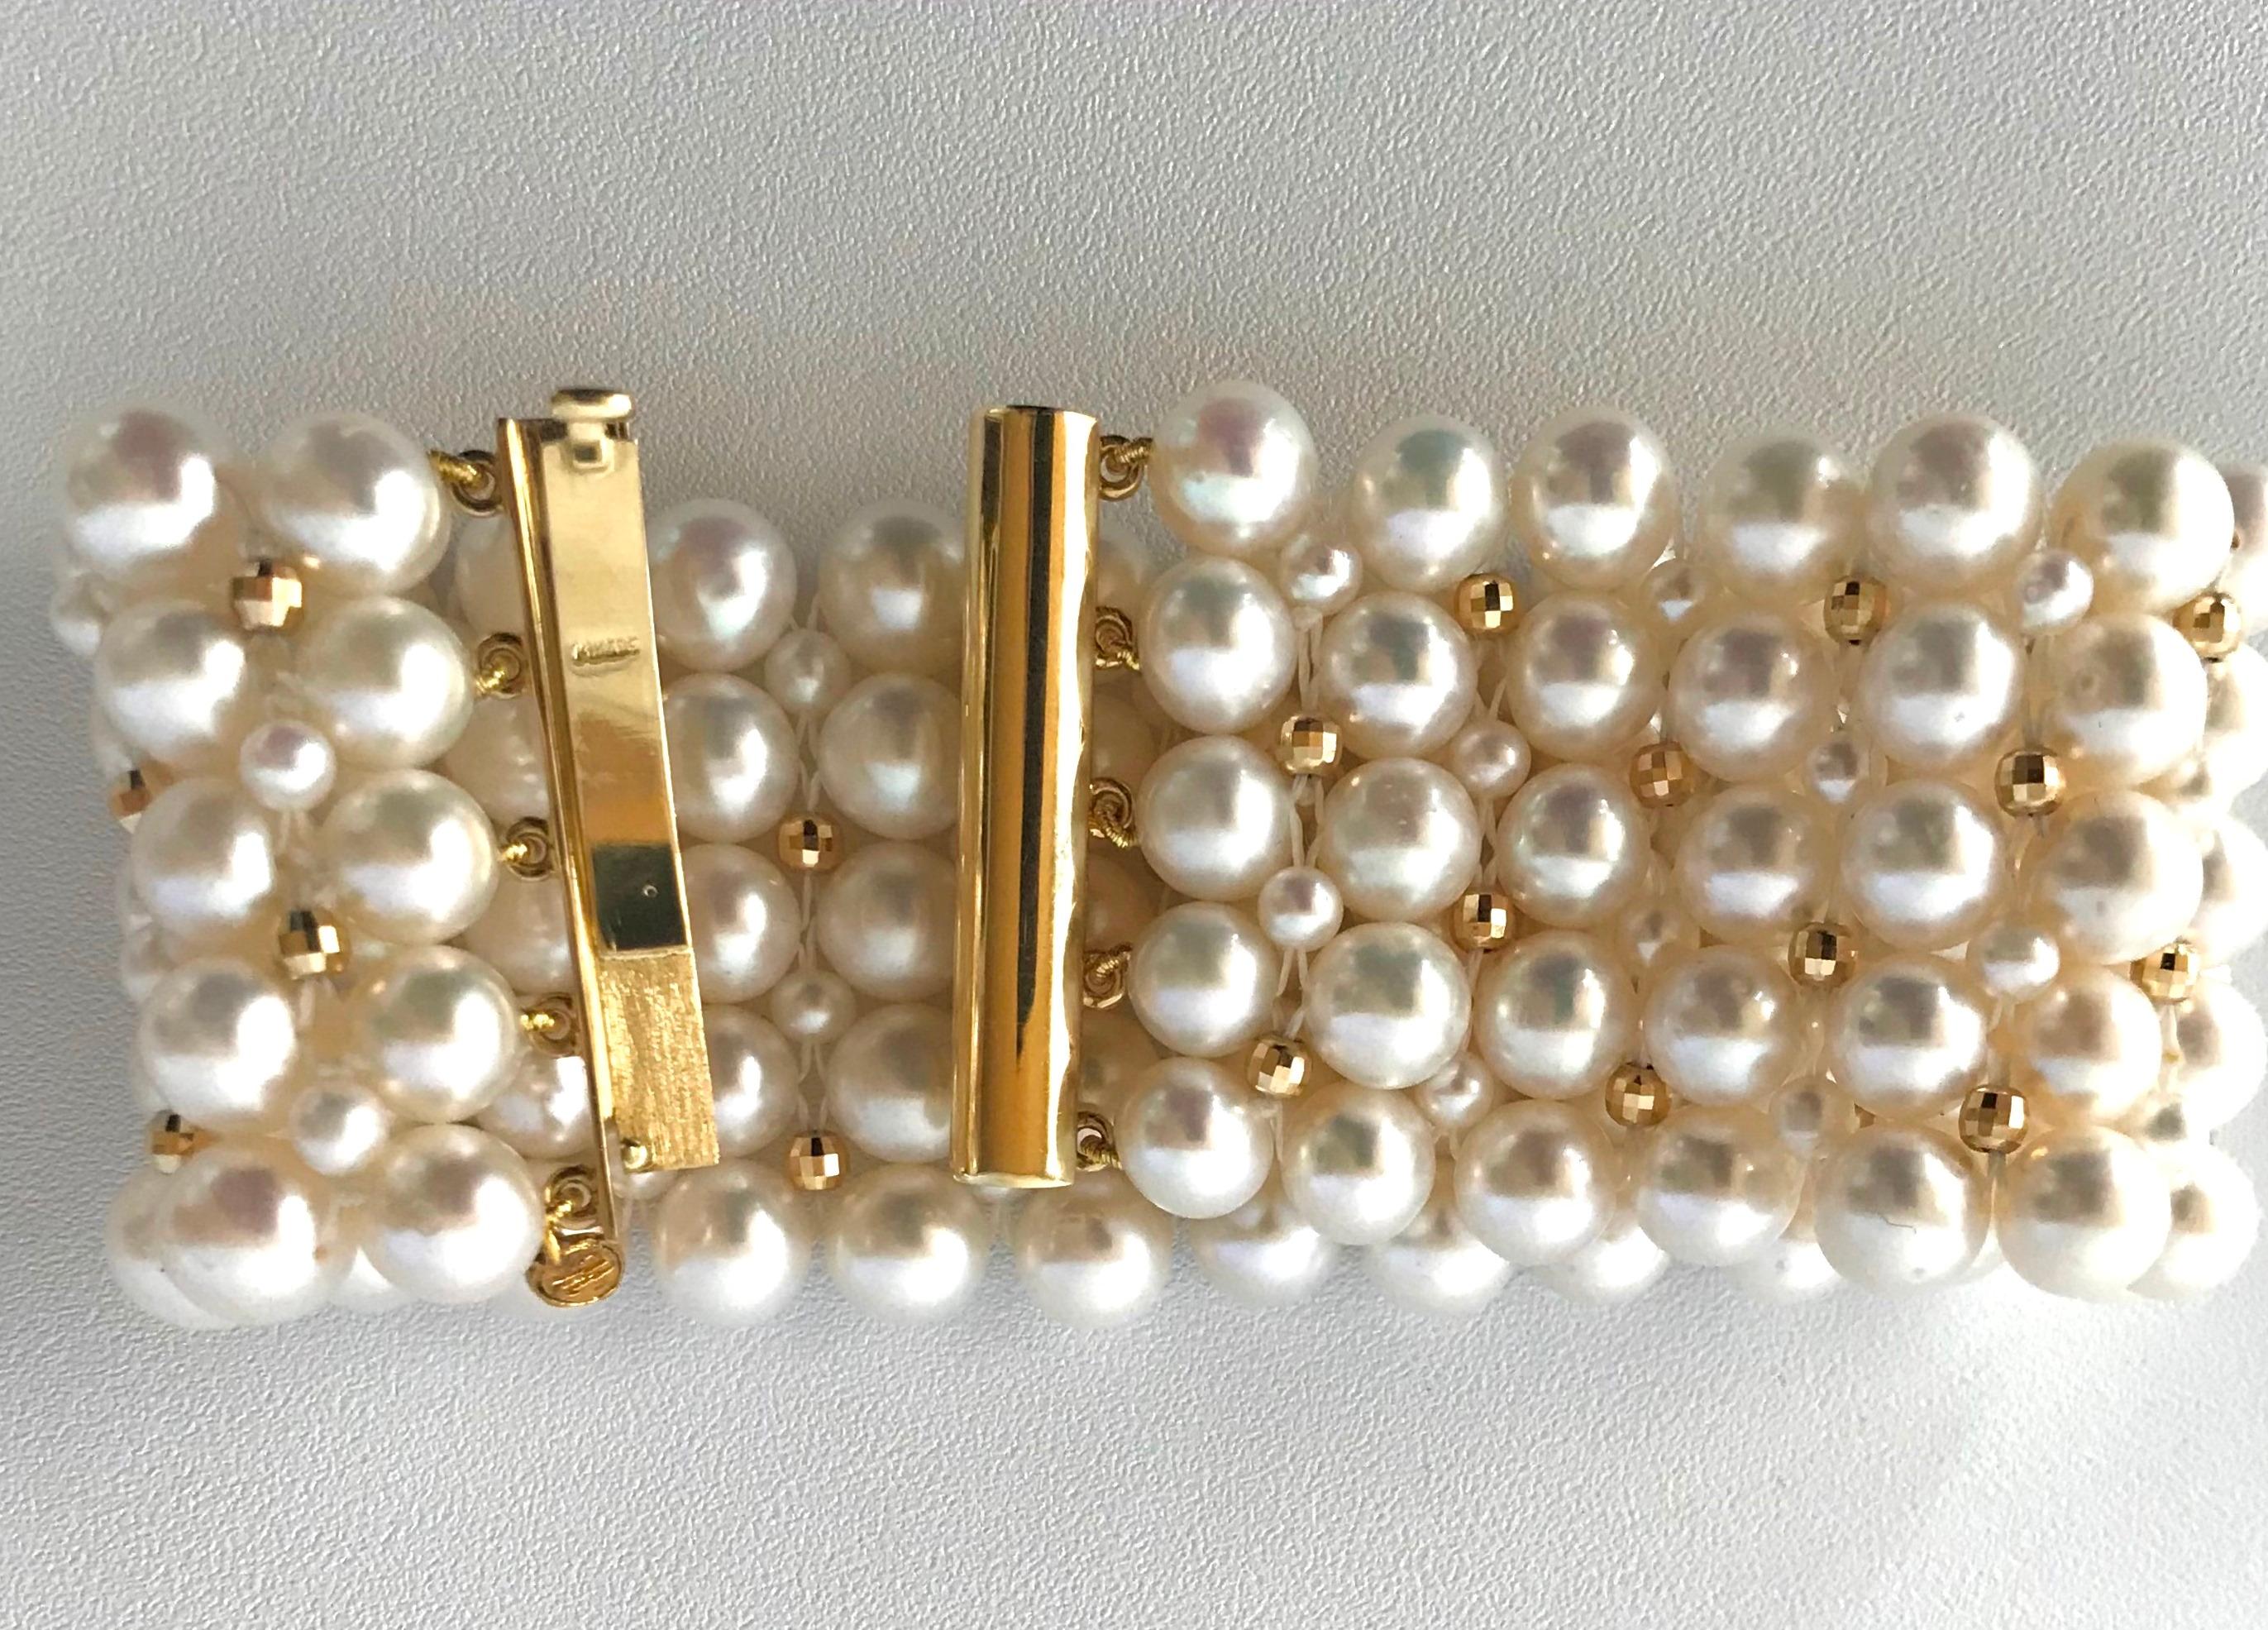 Marina J Stunning Woven Pearl Bracelet with 14 Karat Yellow Gold Beads and Clasp For Sale 6